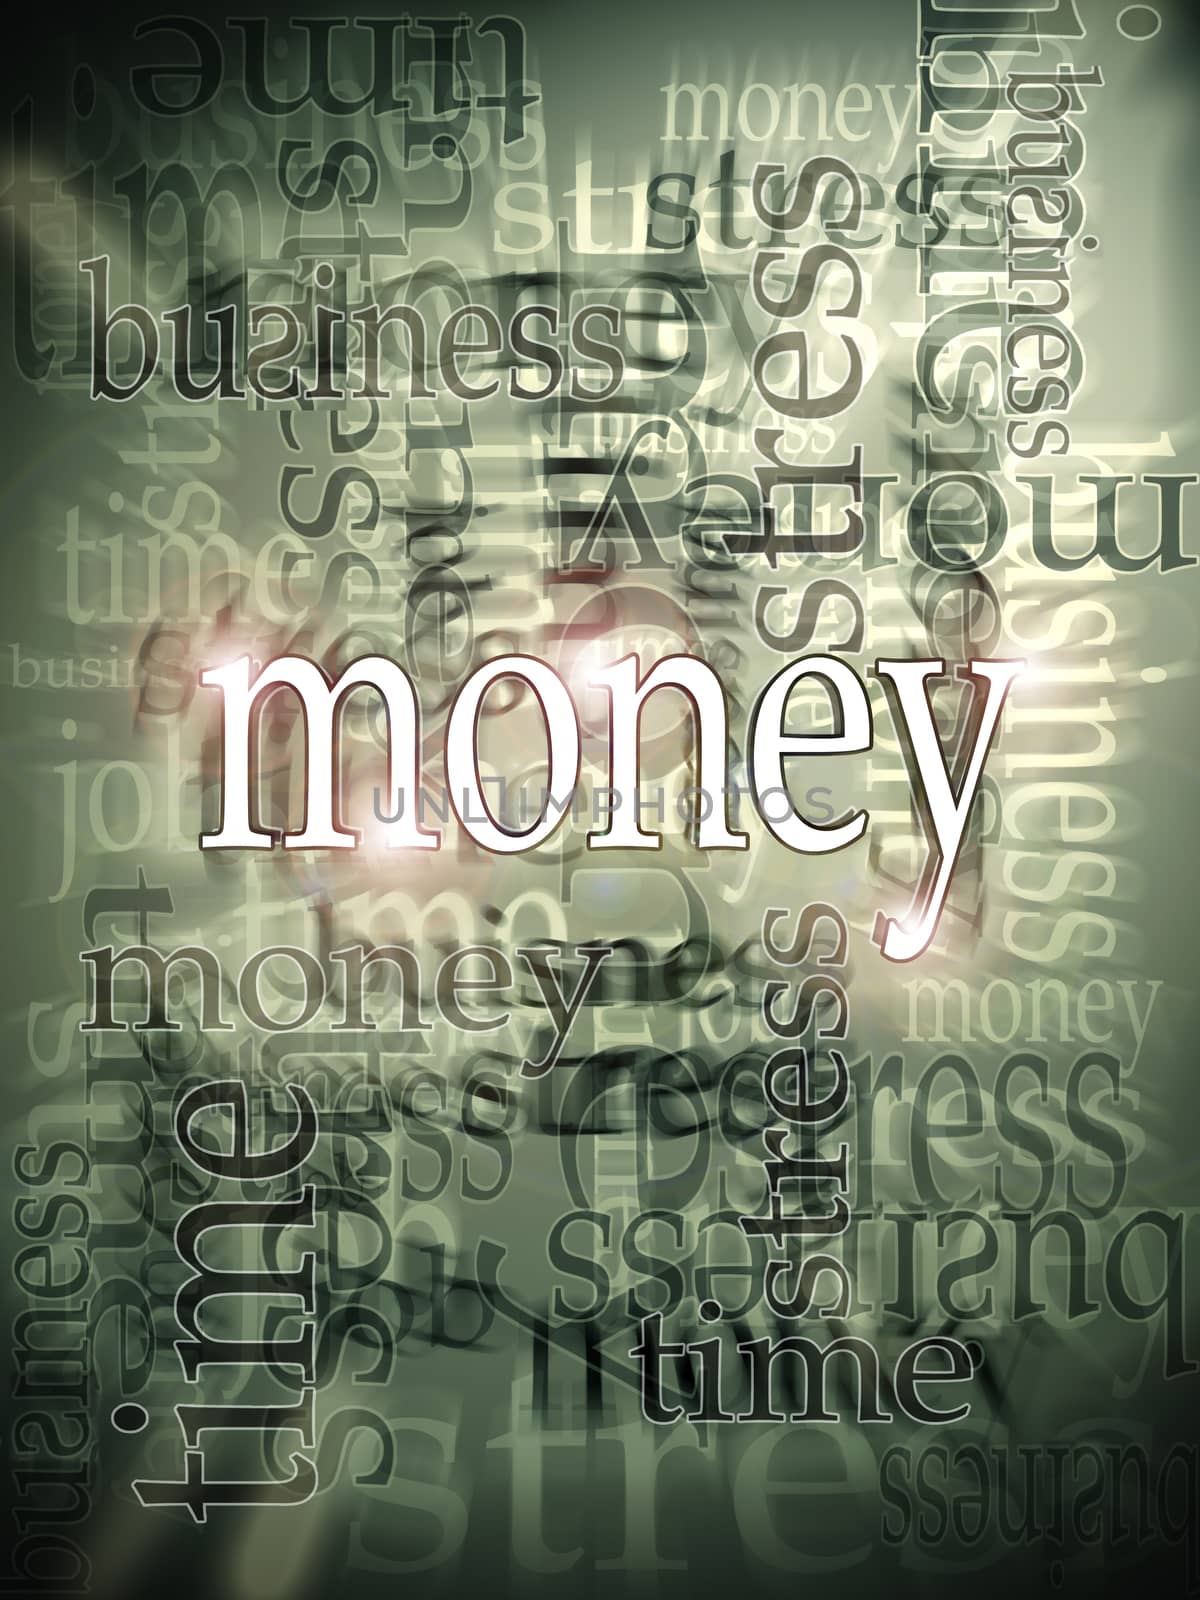 money making abstract background with text by sette